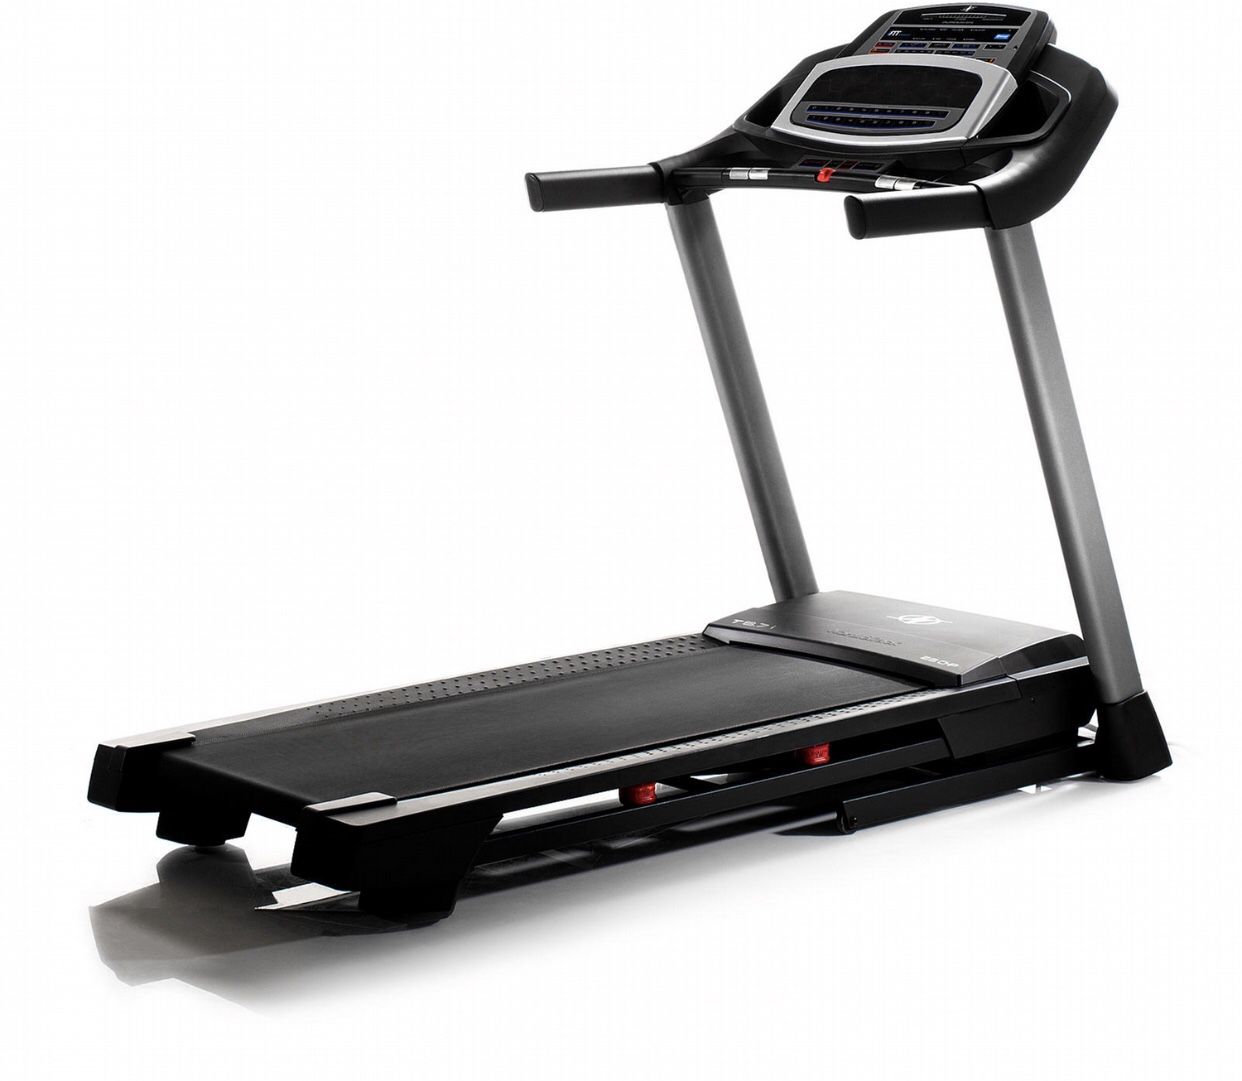 Nordic Track T 6.7c Treadmill- Like new—bought new 1 year ago and used less than 5 times